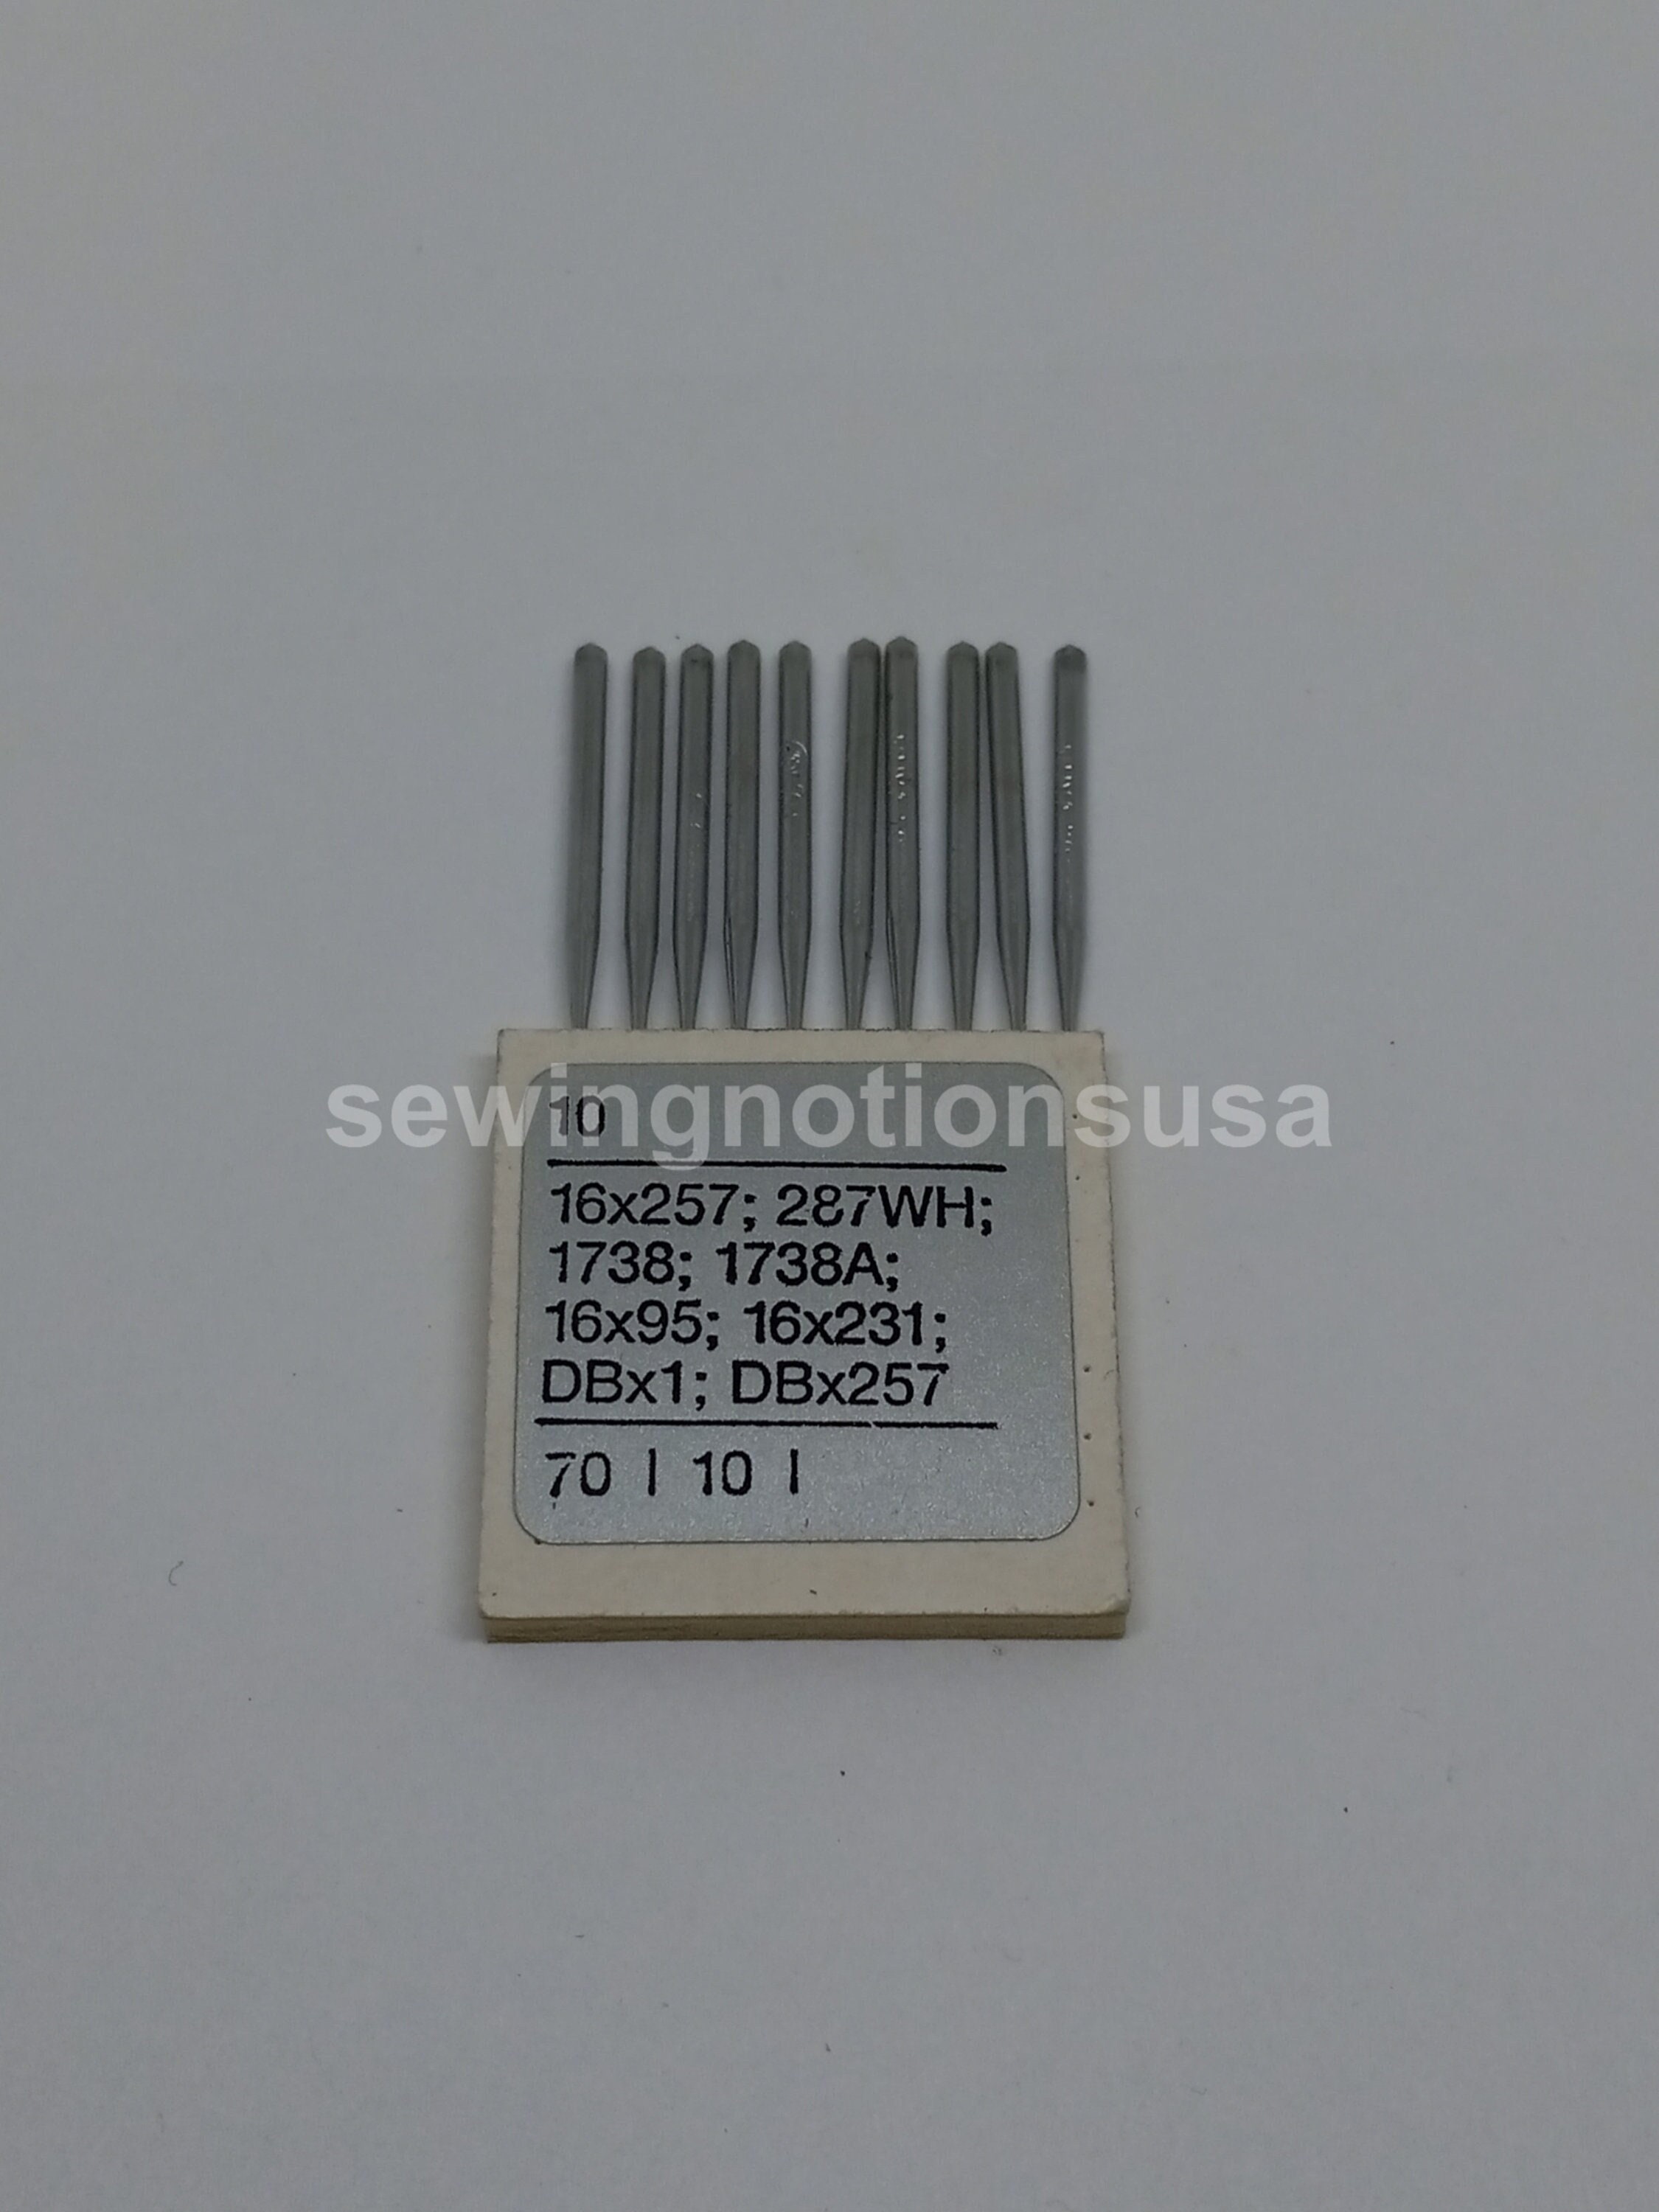 Singer DBx1/16x231 Industrial Sewing Machine Needles Size 11 (Pack